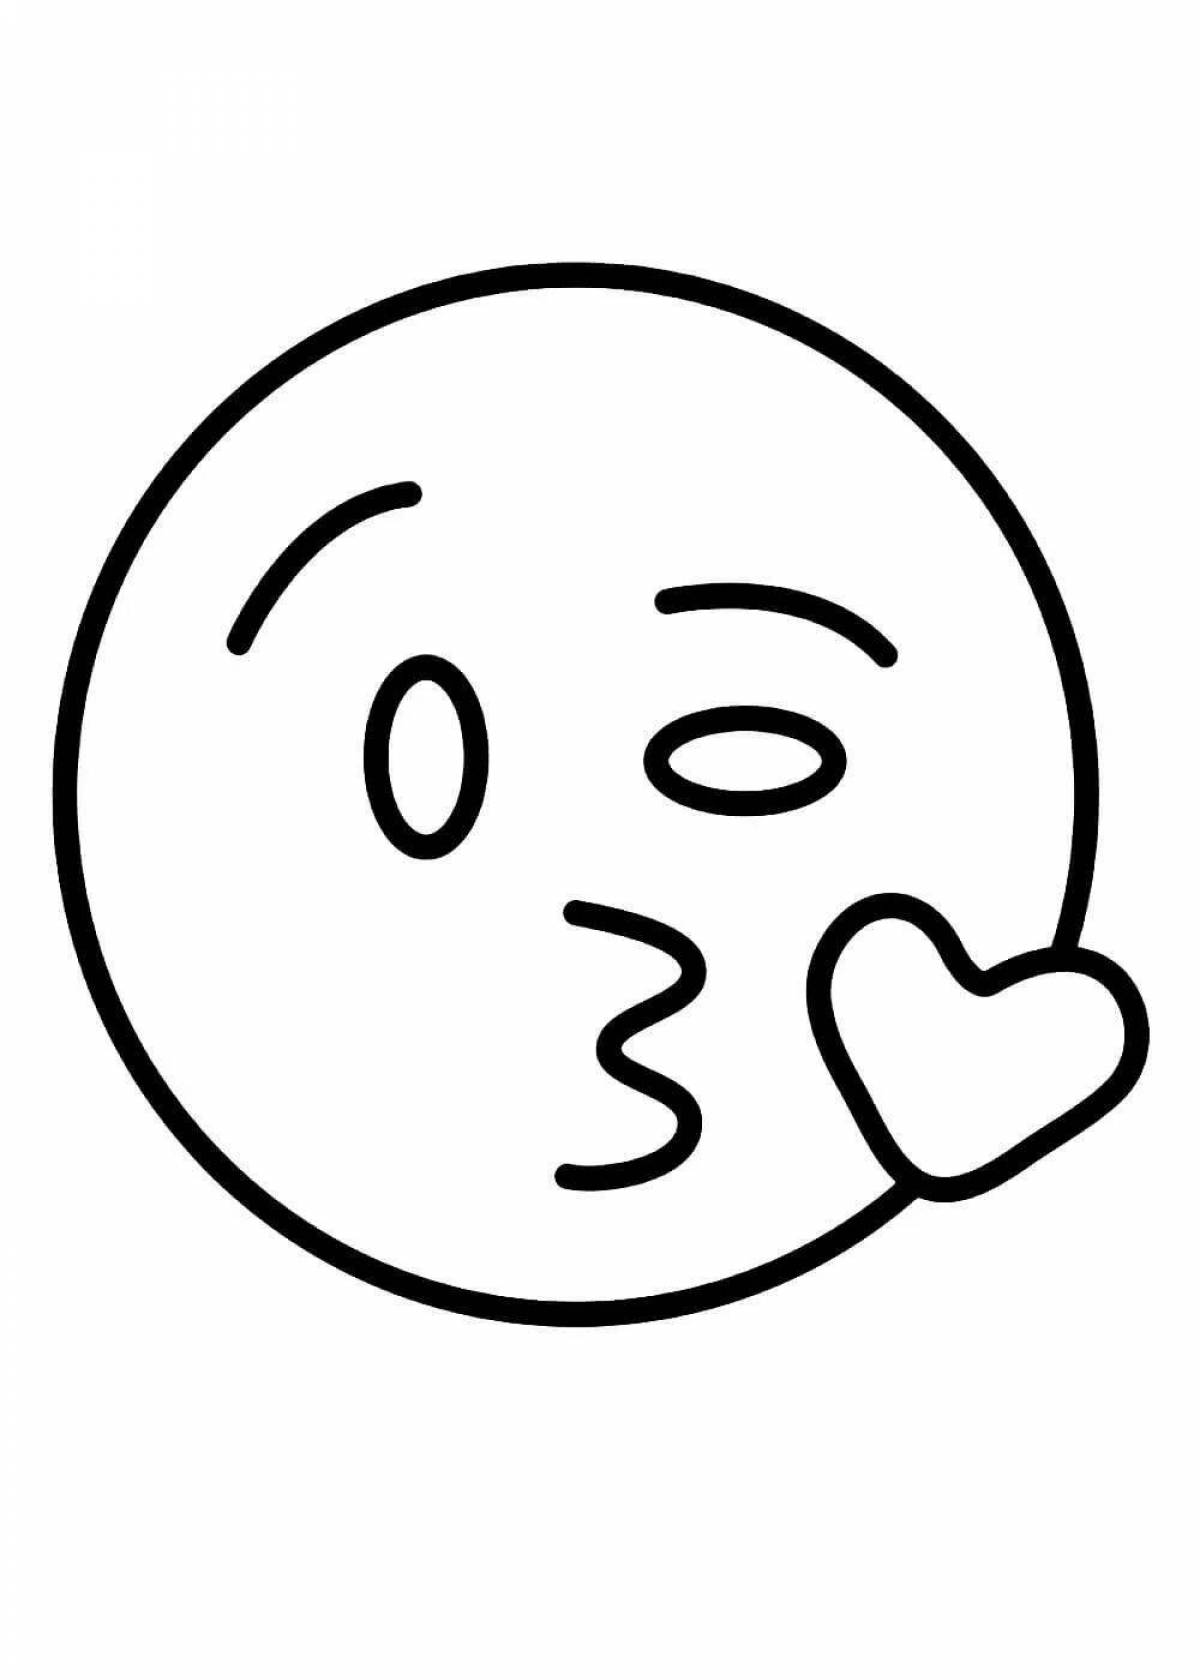 Lovely emoji coloring page